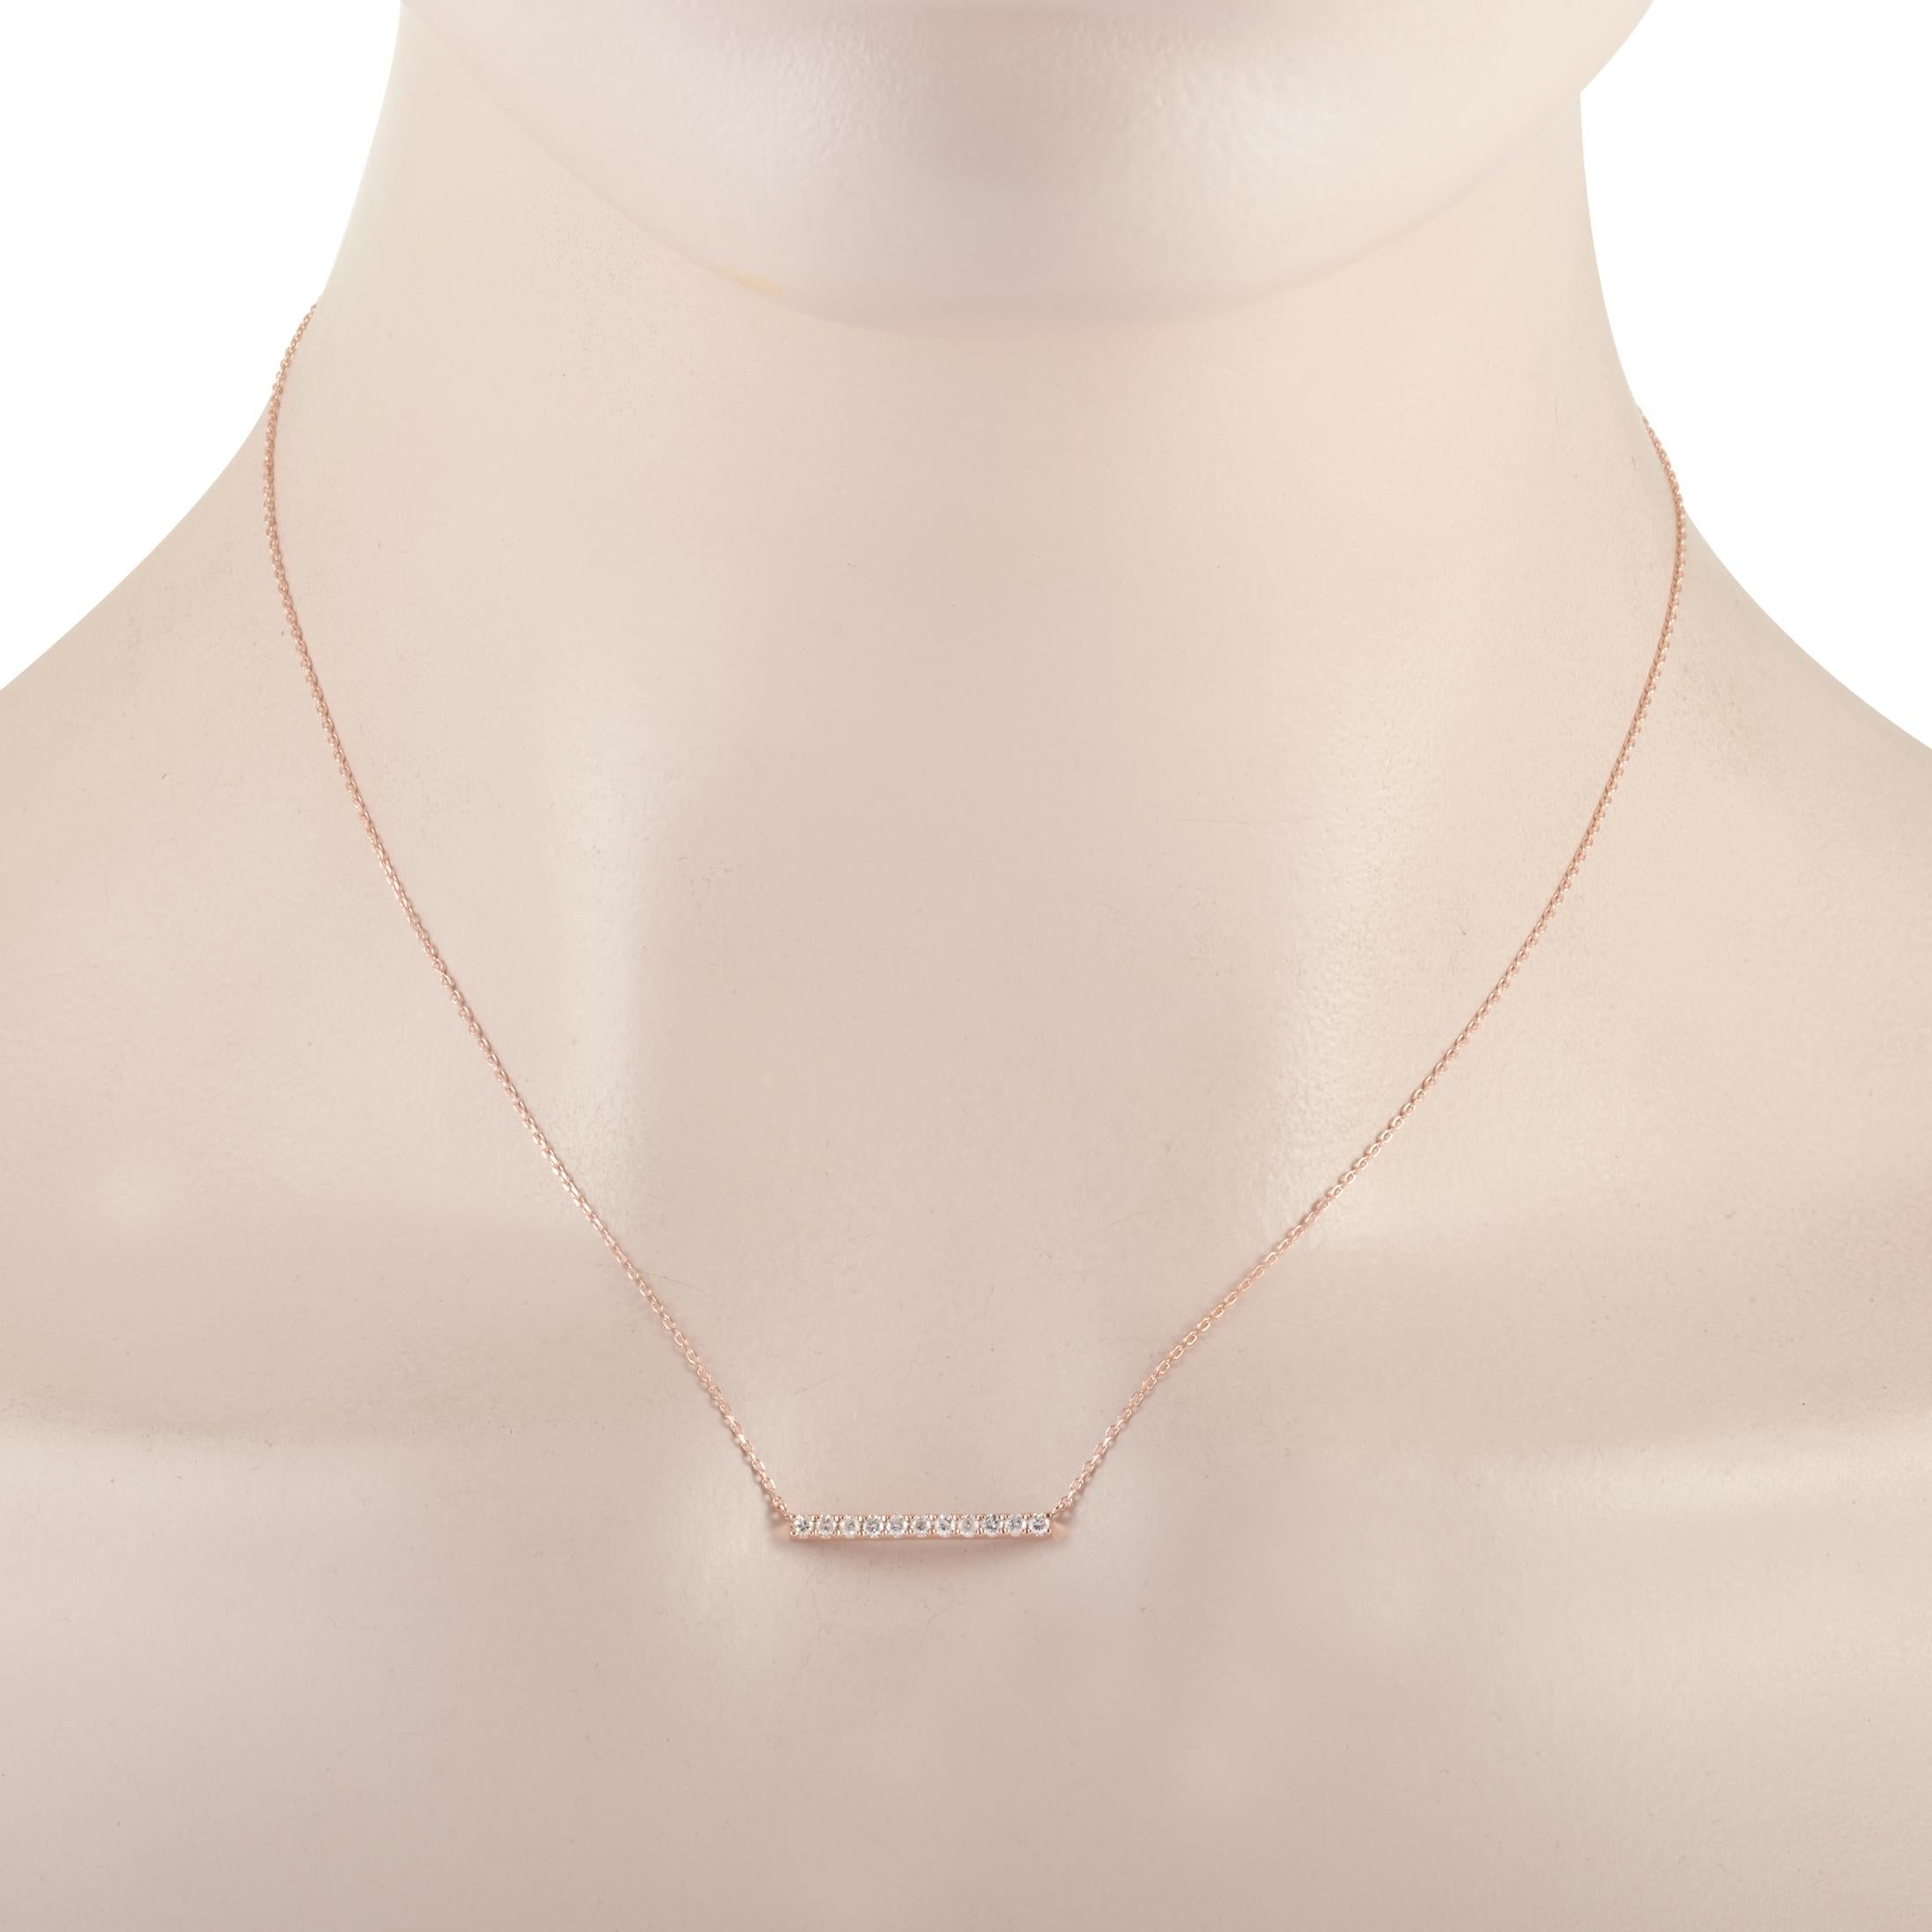 This LB Exclusive necklace is crafted from 14K rose gold and weighs 2 grams. It is presented with a 15” chain and boasts a pendant that measures 0.07” in length and 0.75” in width. The necklace is set with diamonds that total 0.25 carats.
 
 Offered